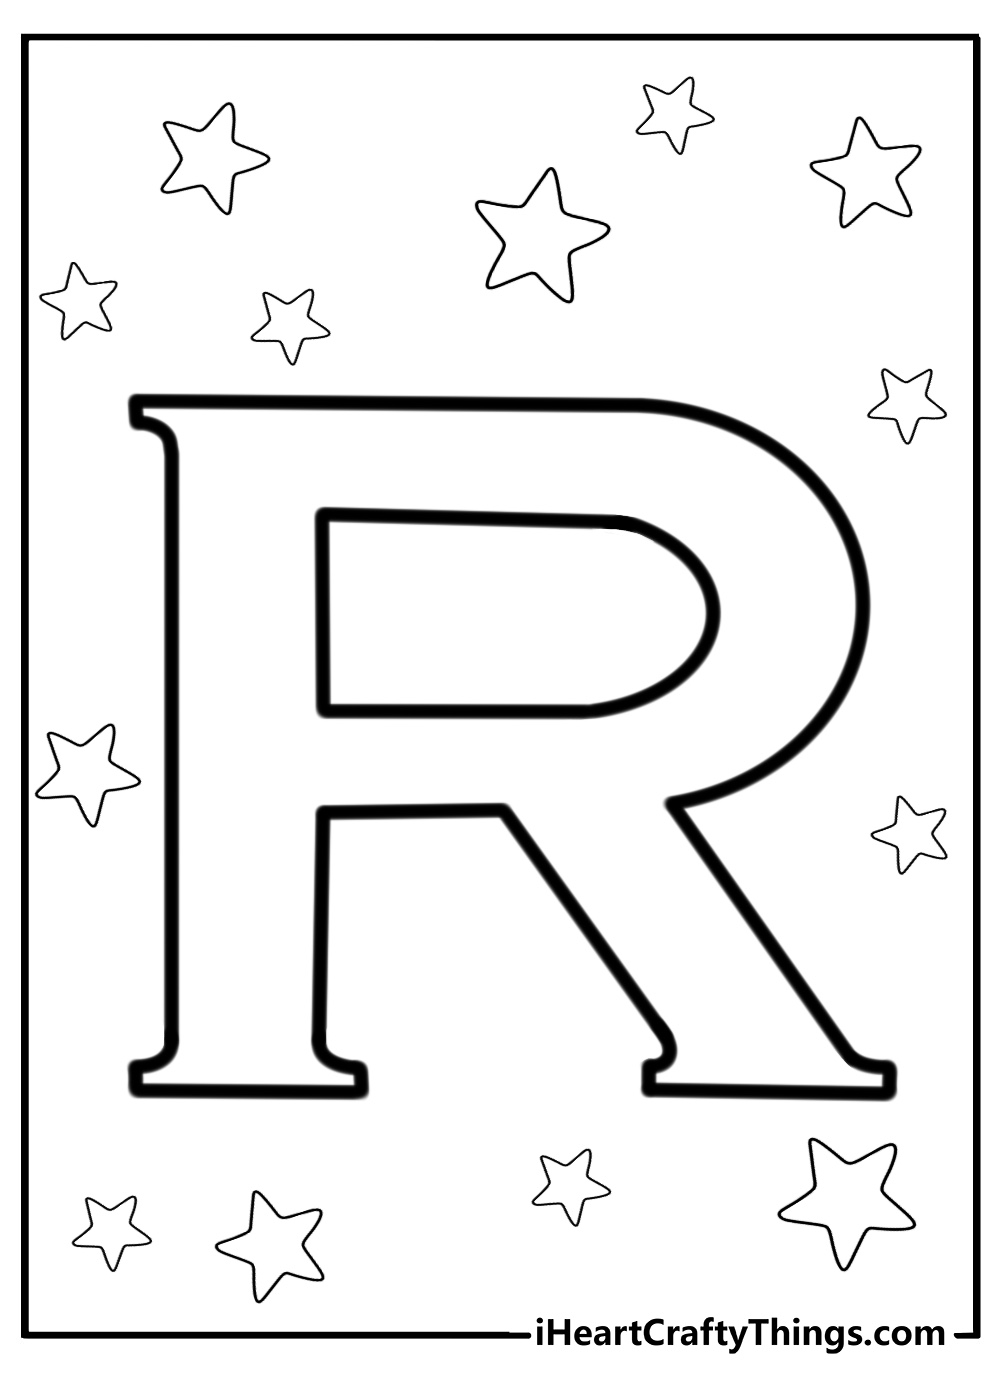 Capital letter r coloring page